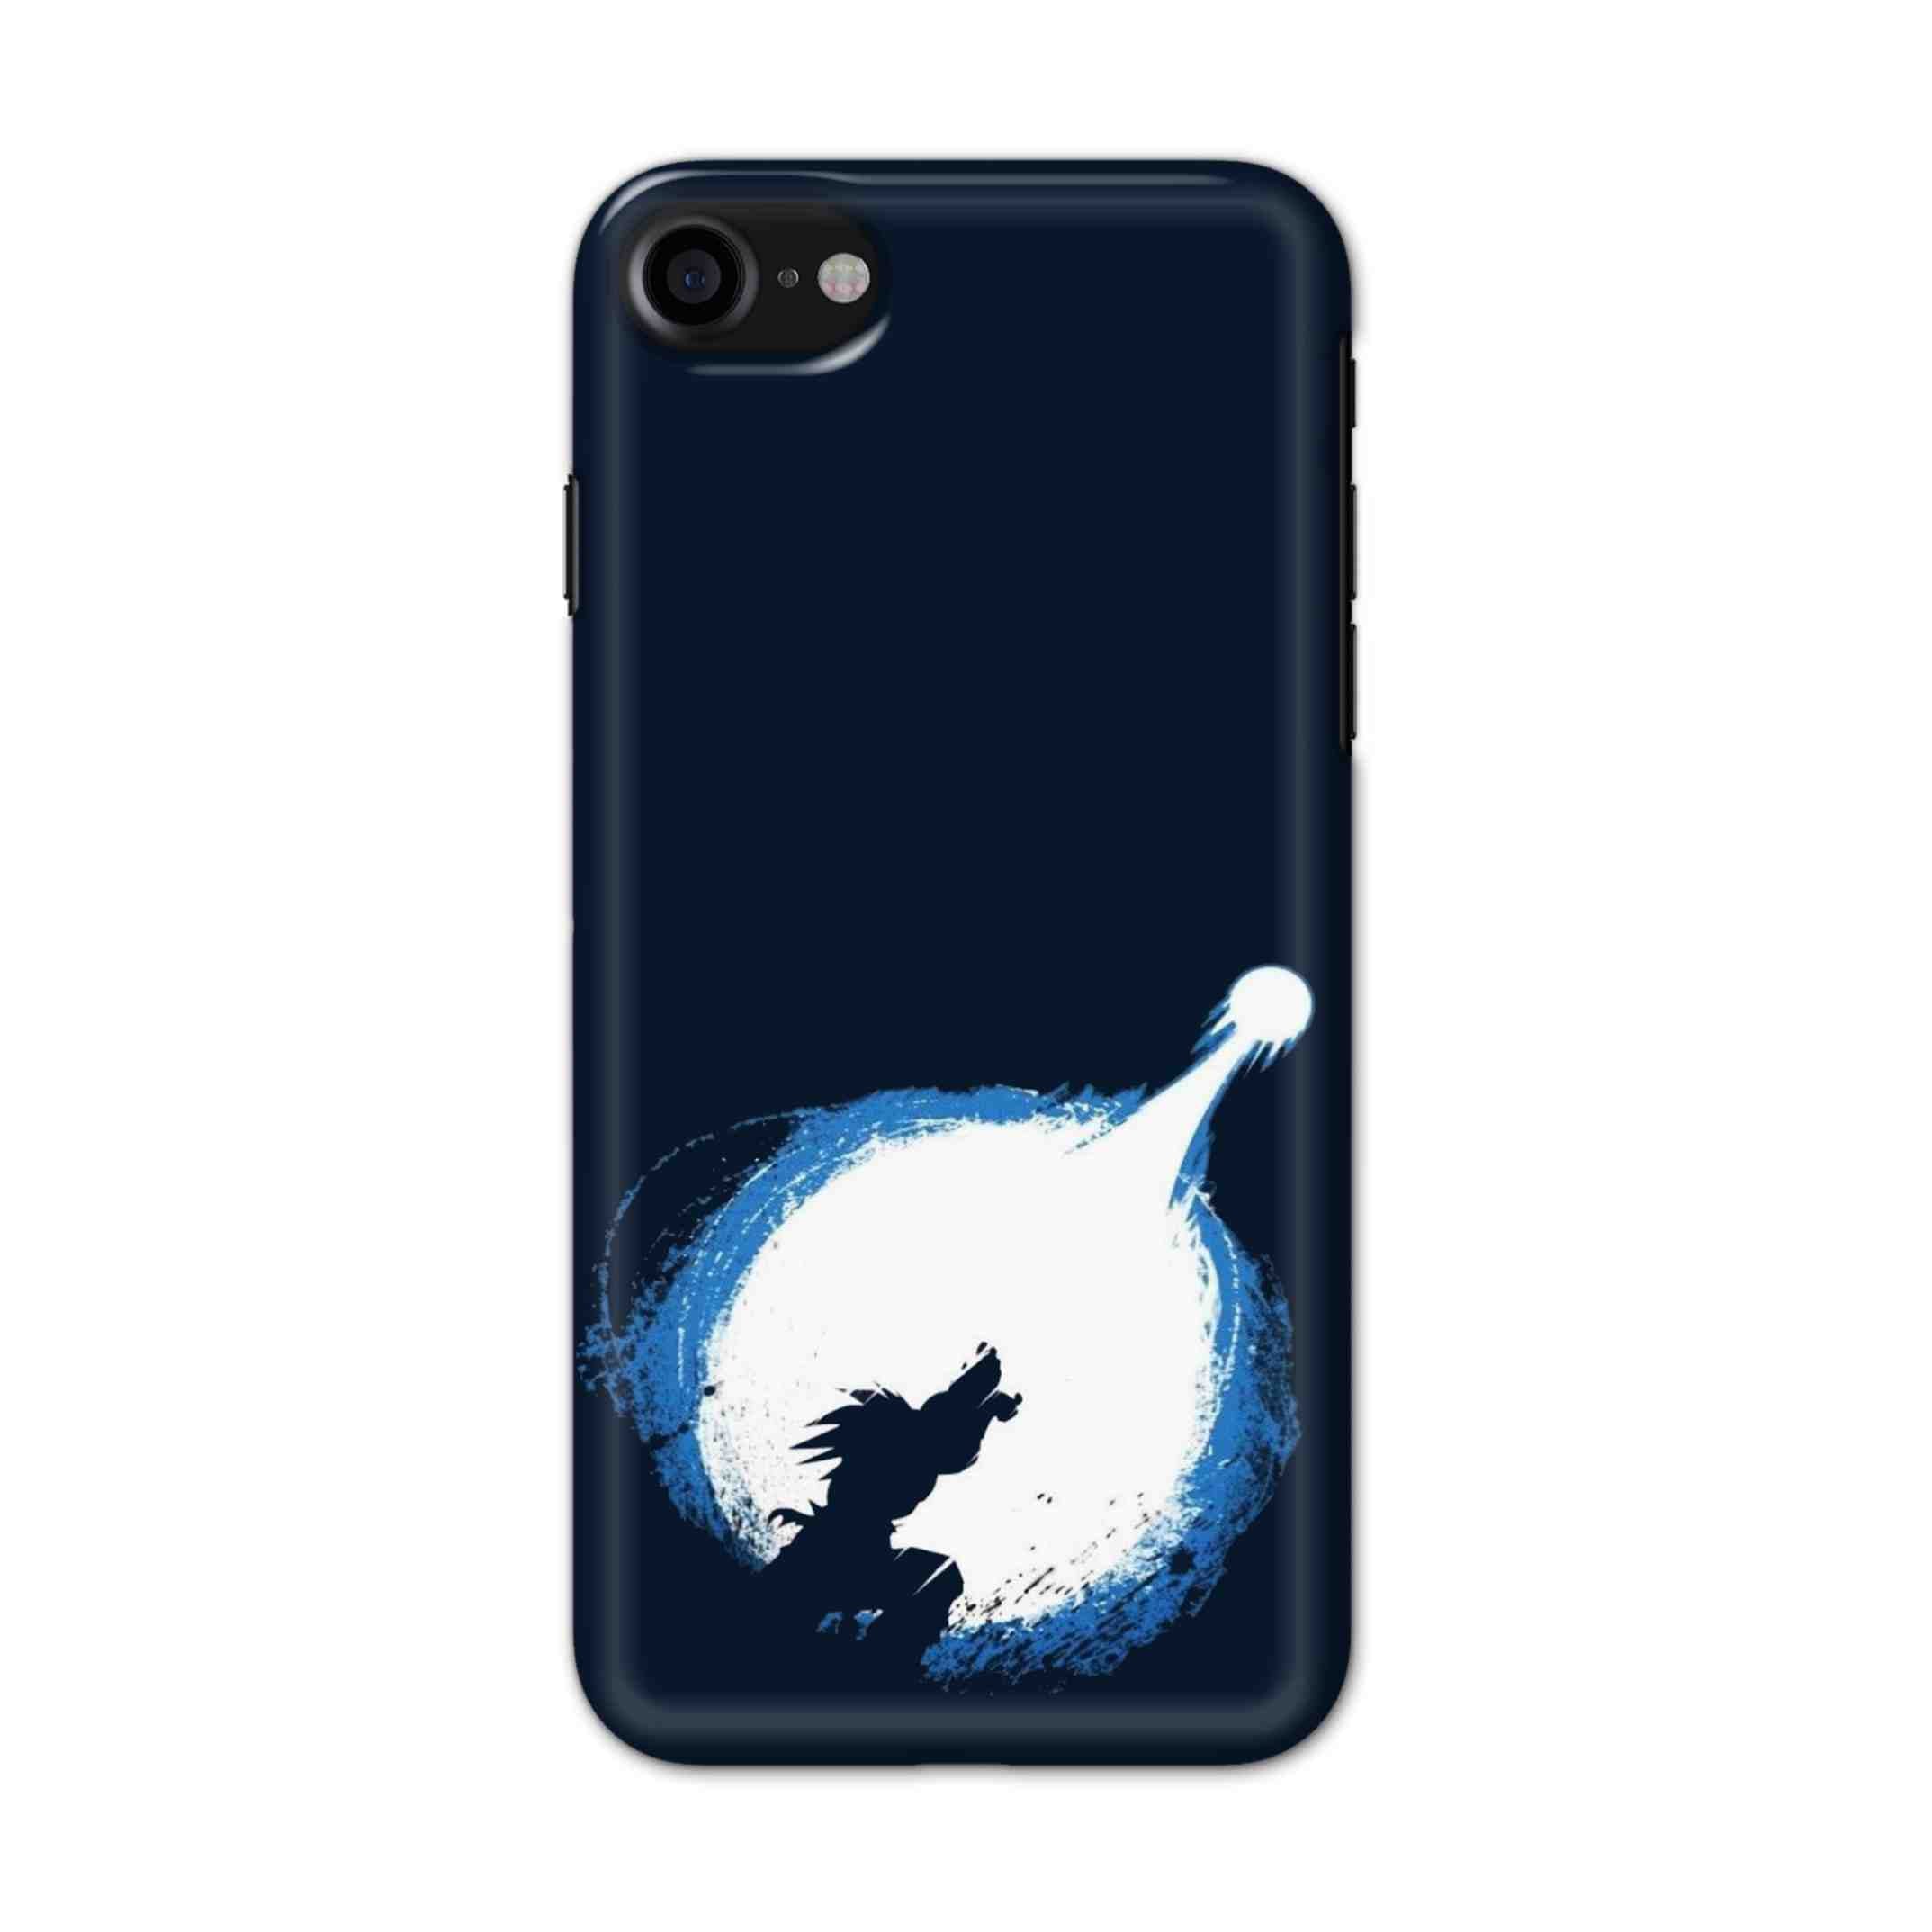 Buy Goku Power Hard Back Mobile Phone Case/Cover For iPhone 7 / 8 Online